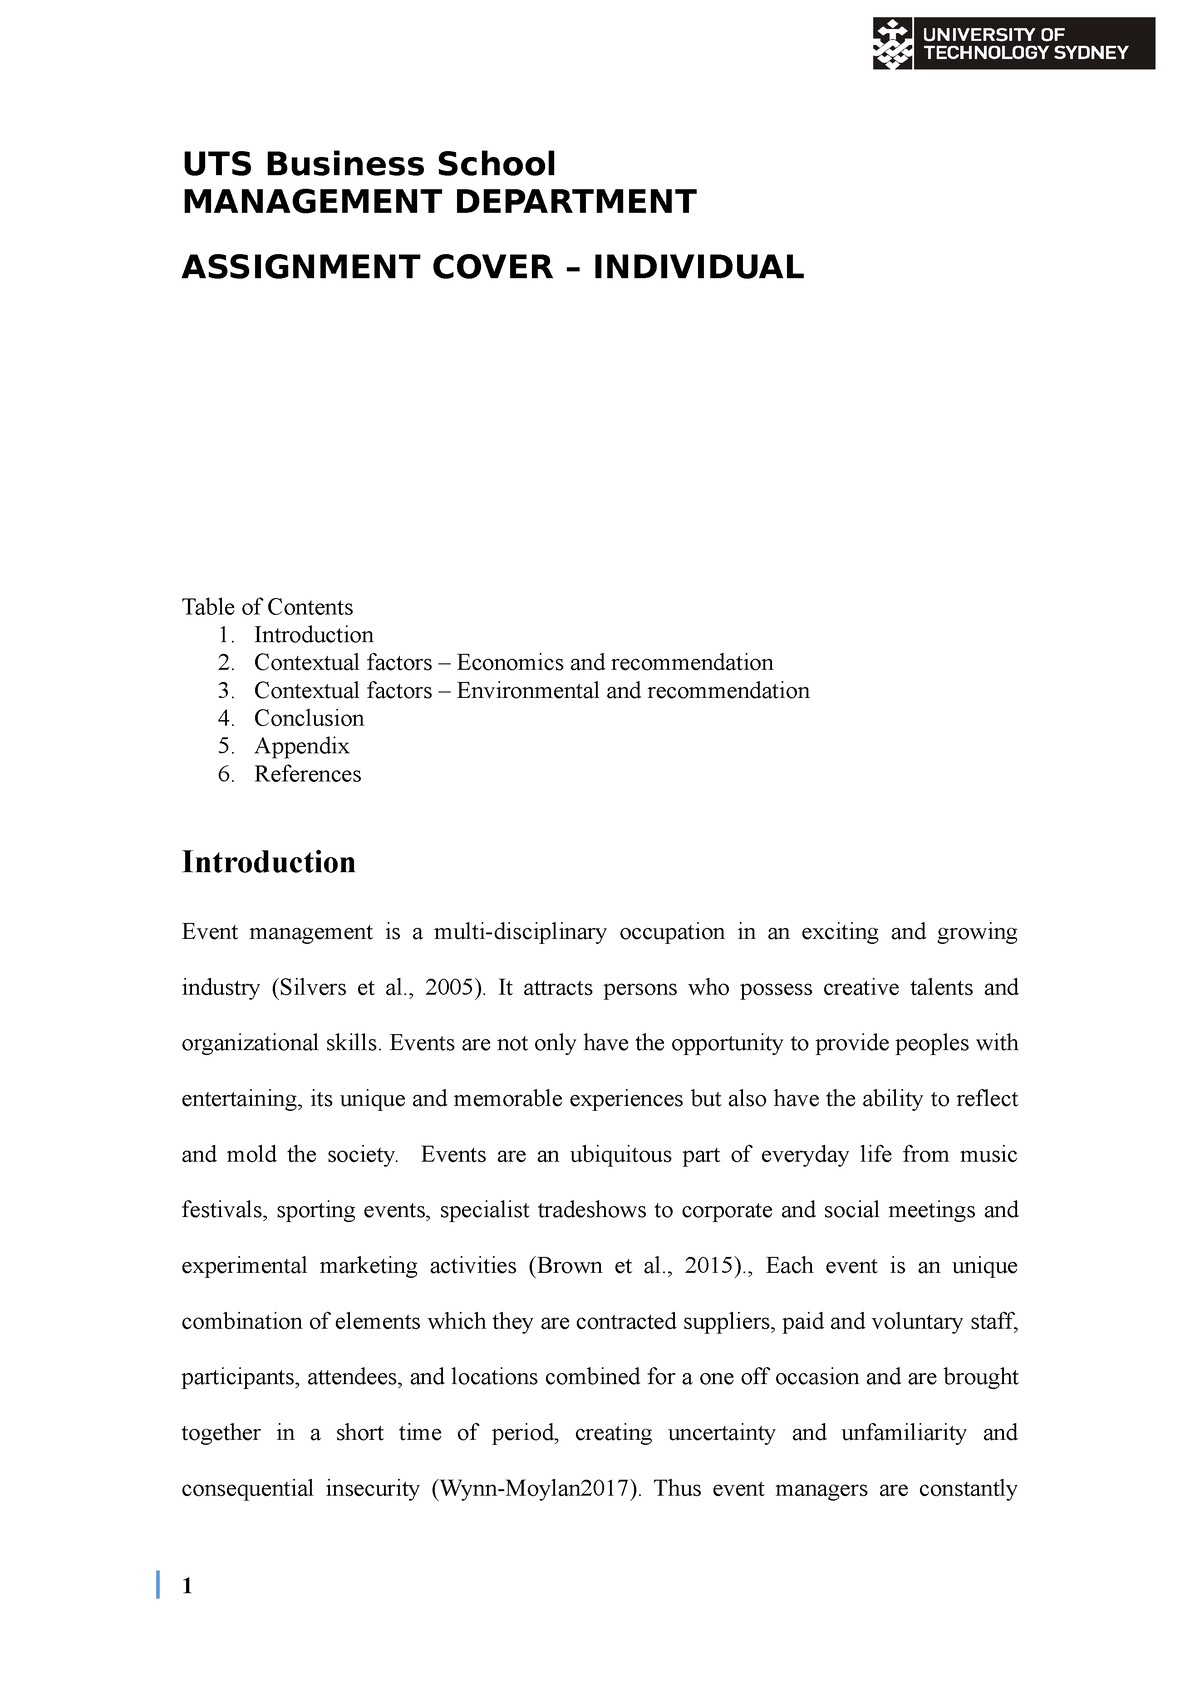 research paper in uts